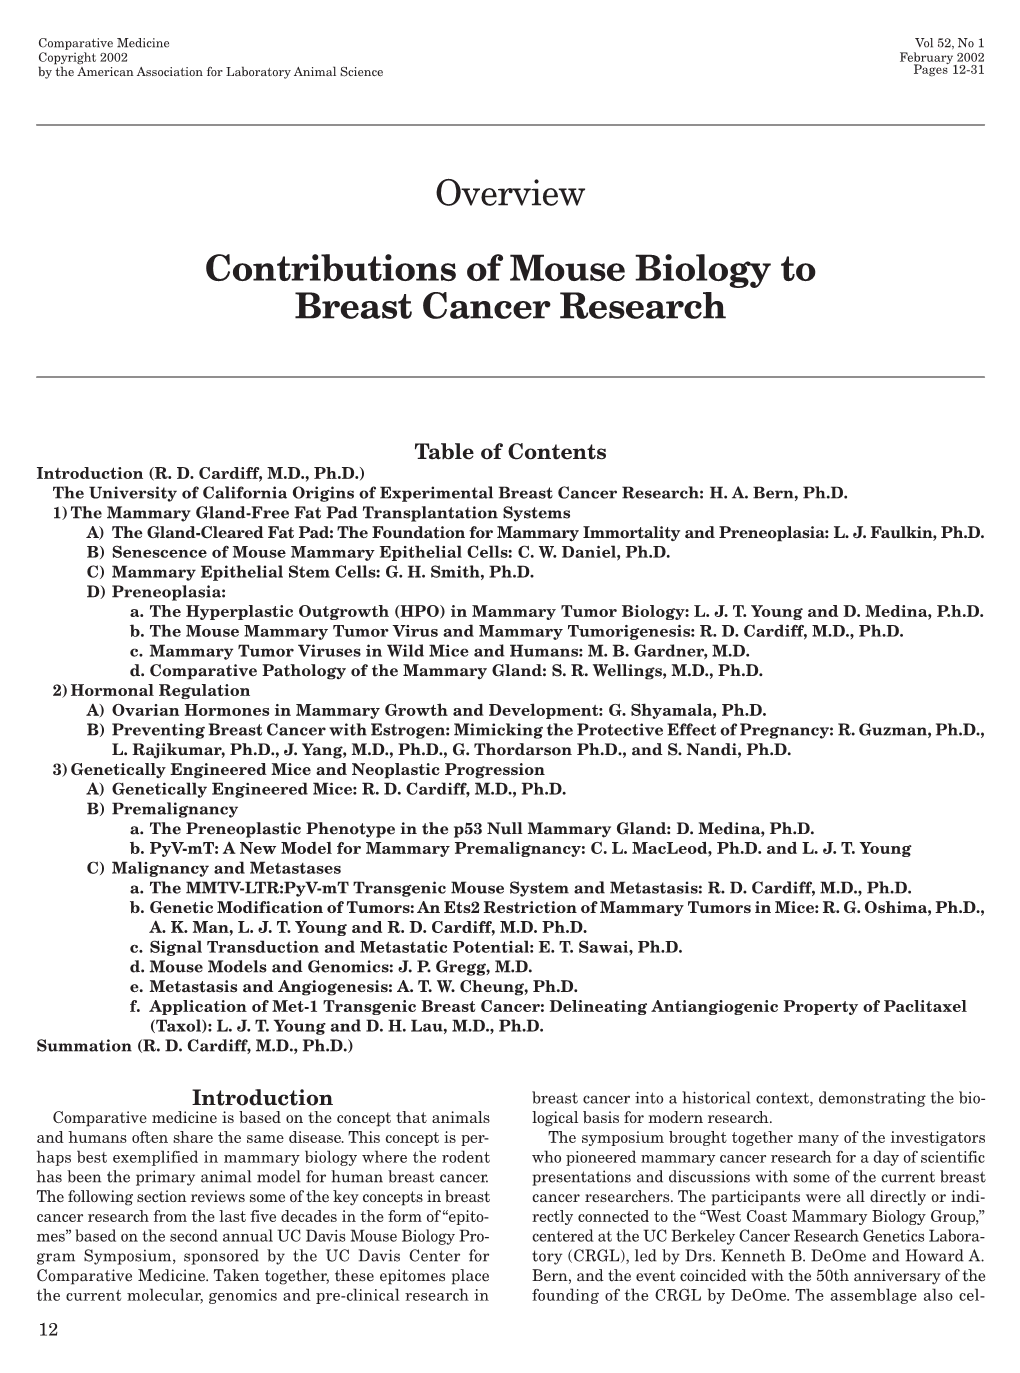 Contributions of Mouse Biology to Breast Cancer Research